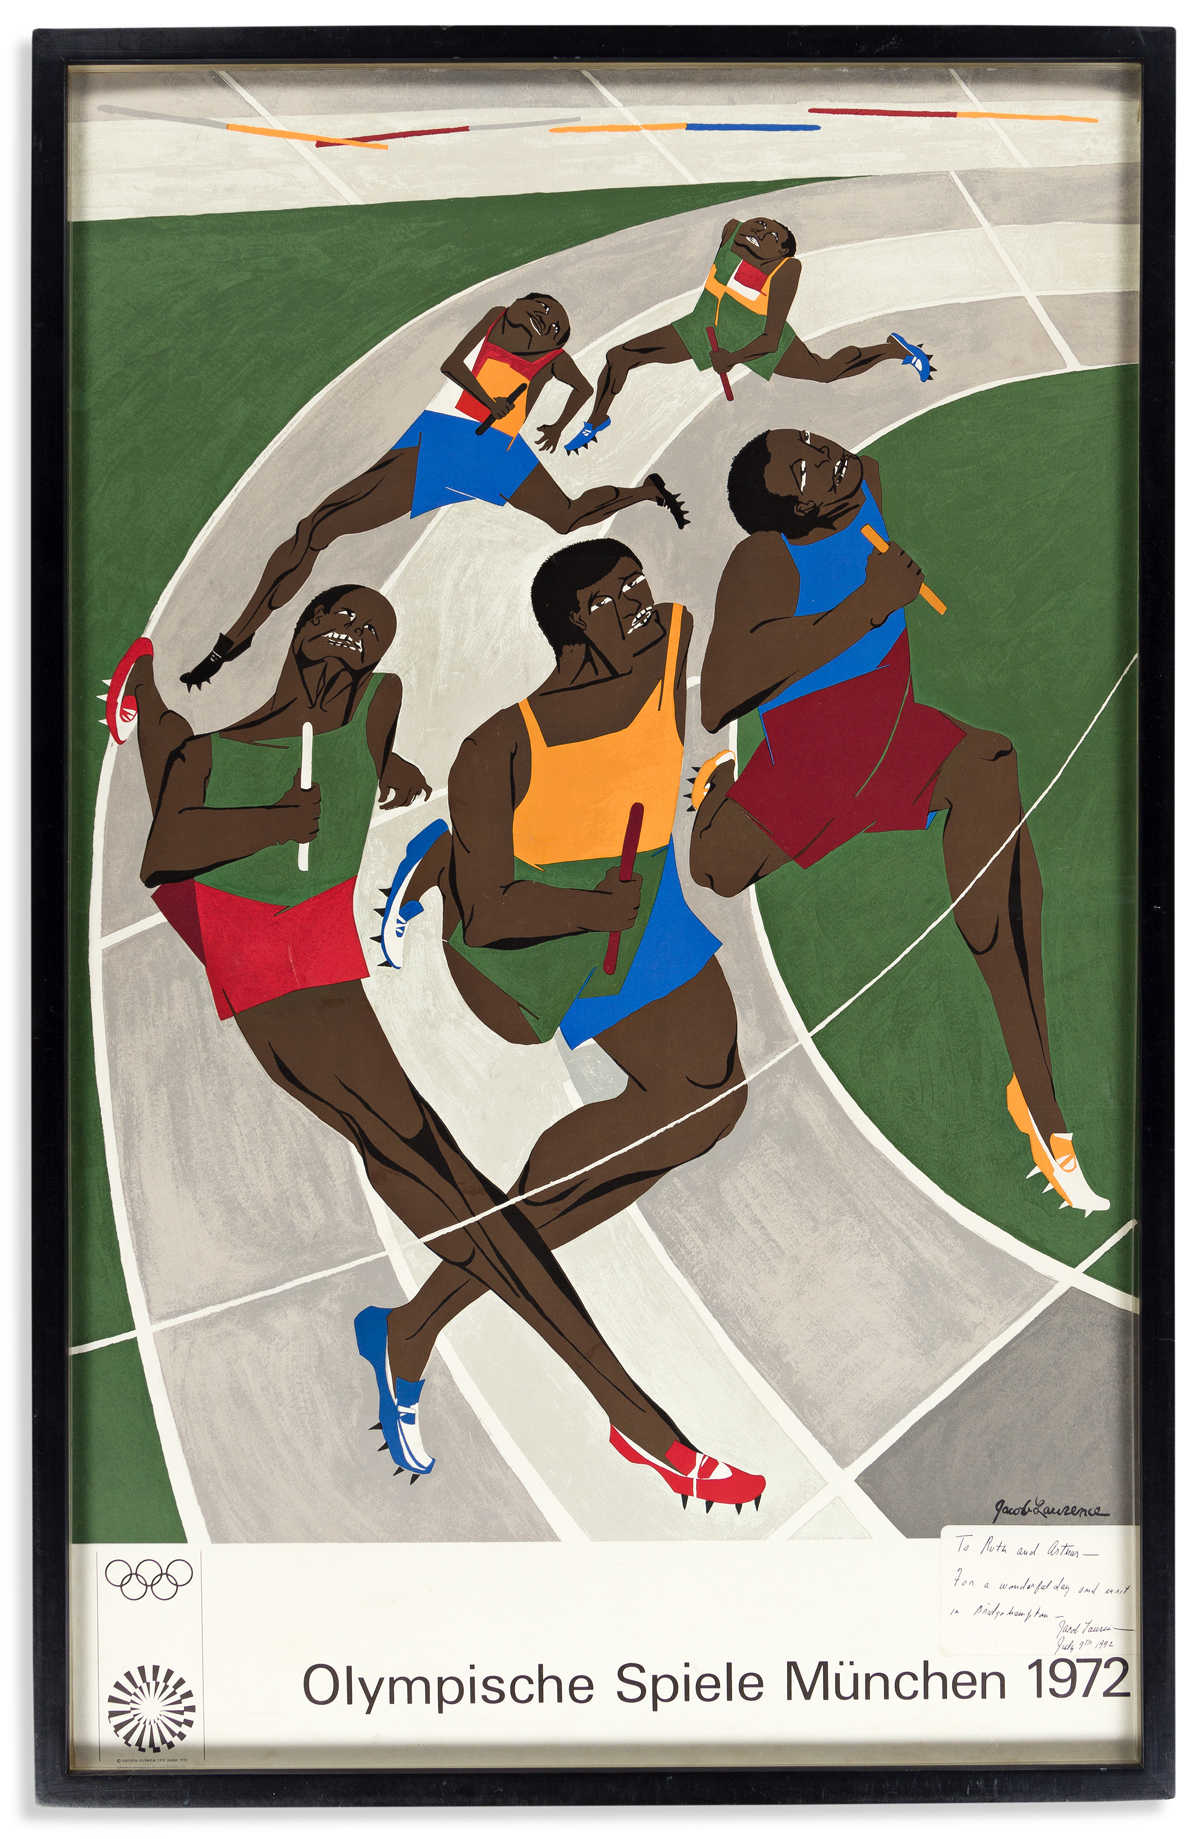 (ART.) Jacob Lawrence. Olympische Spiele München 1972.